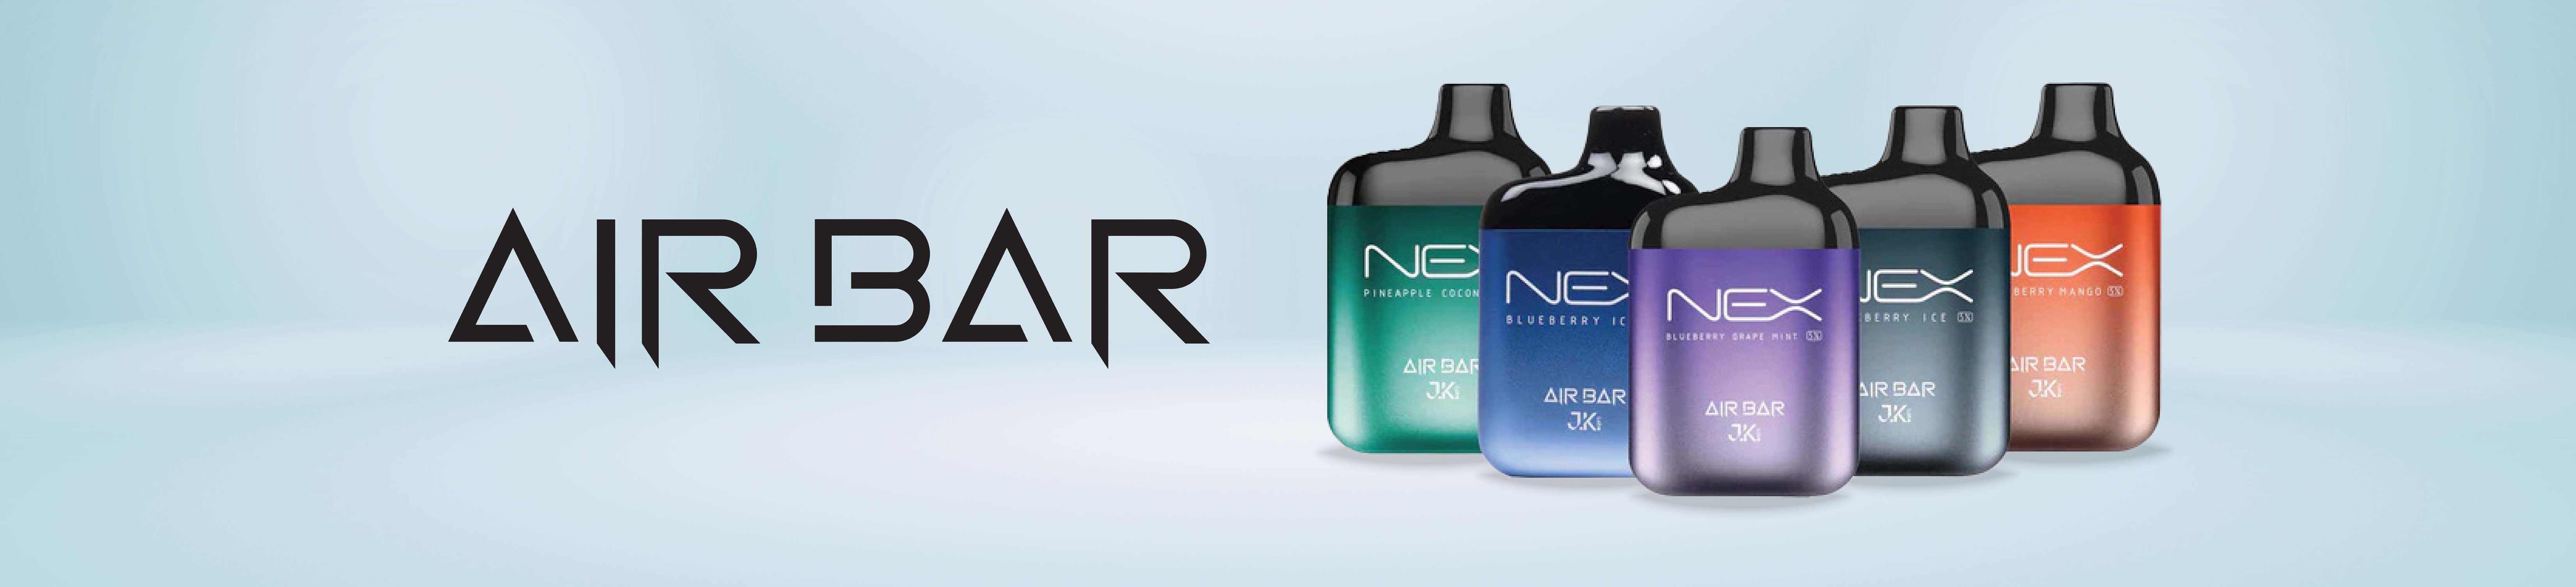 Air Bar NEX and Airlove Collection Banner